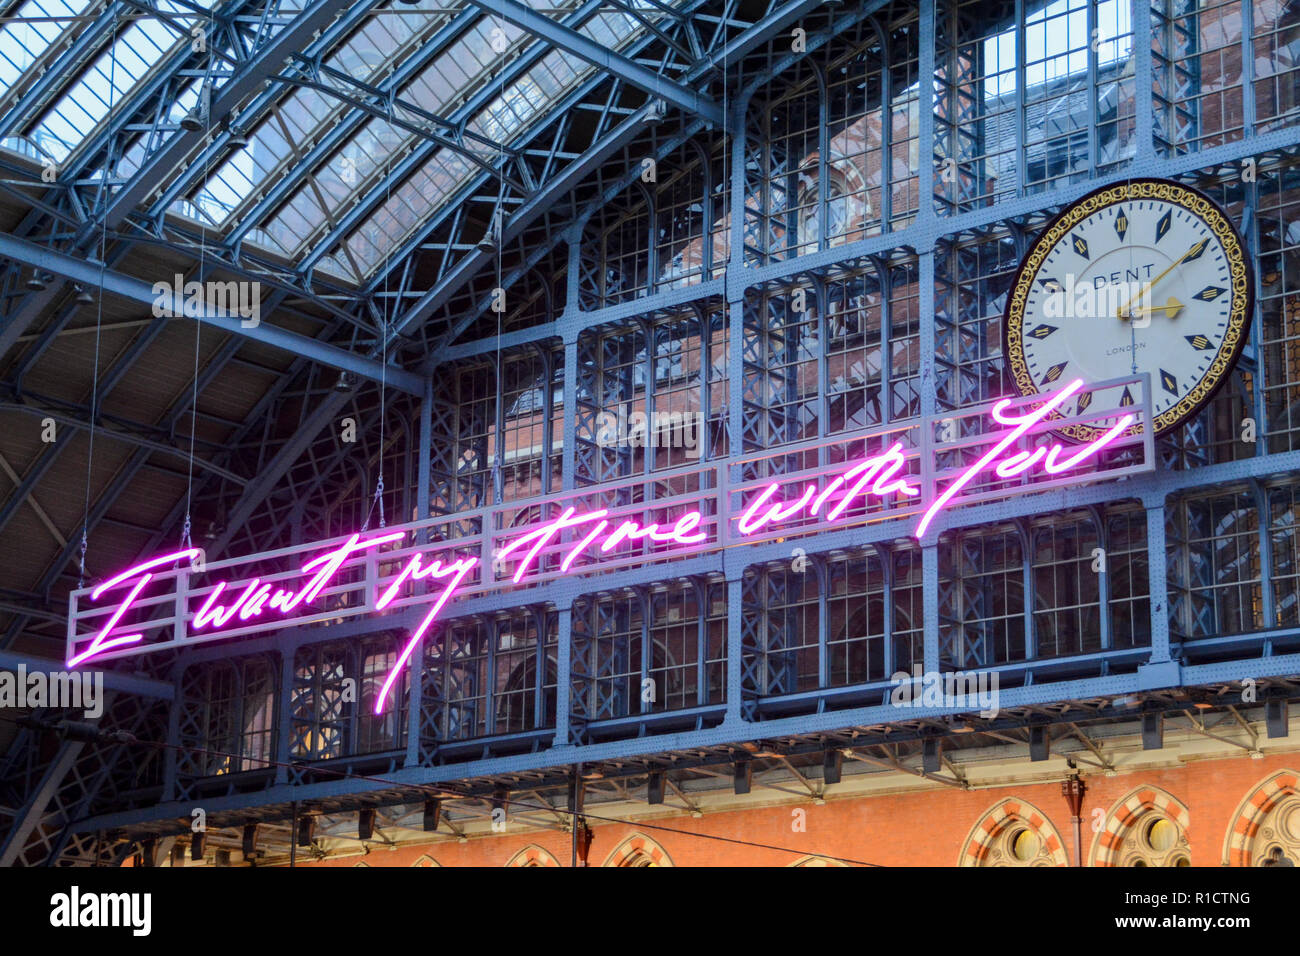 Tracey Emin's pink neon installation I Want My Time With You neon signage next to the world famous Dent clock face at St Pancras Station, London, UK Stock Photo